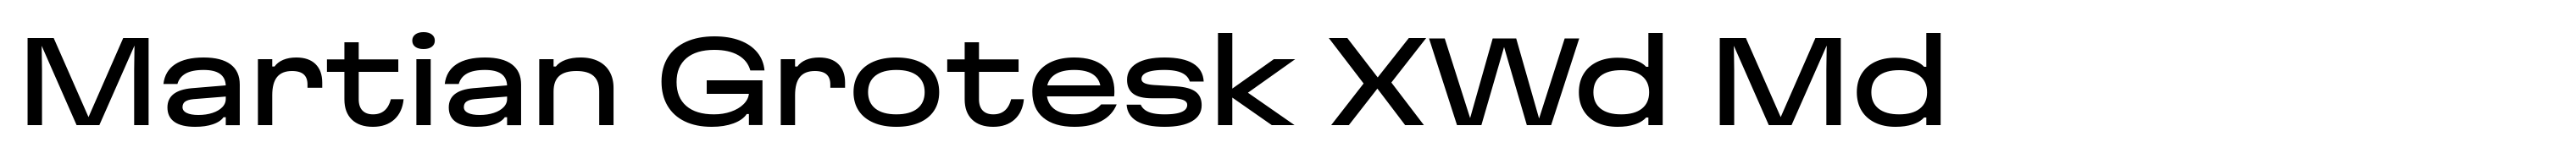 Martian Grotesk XWd Md